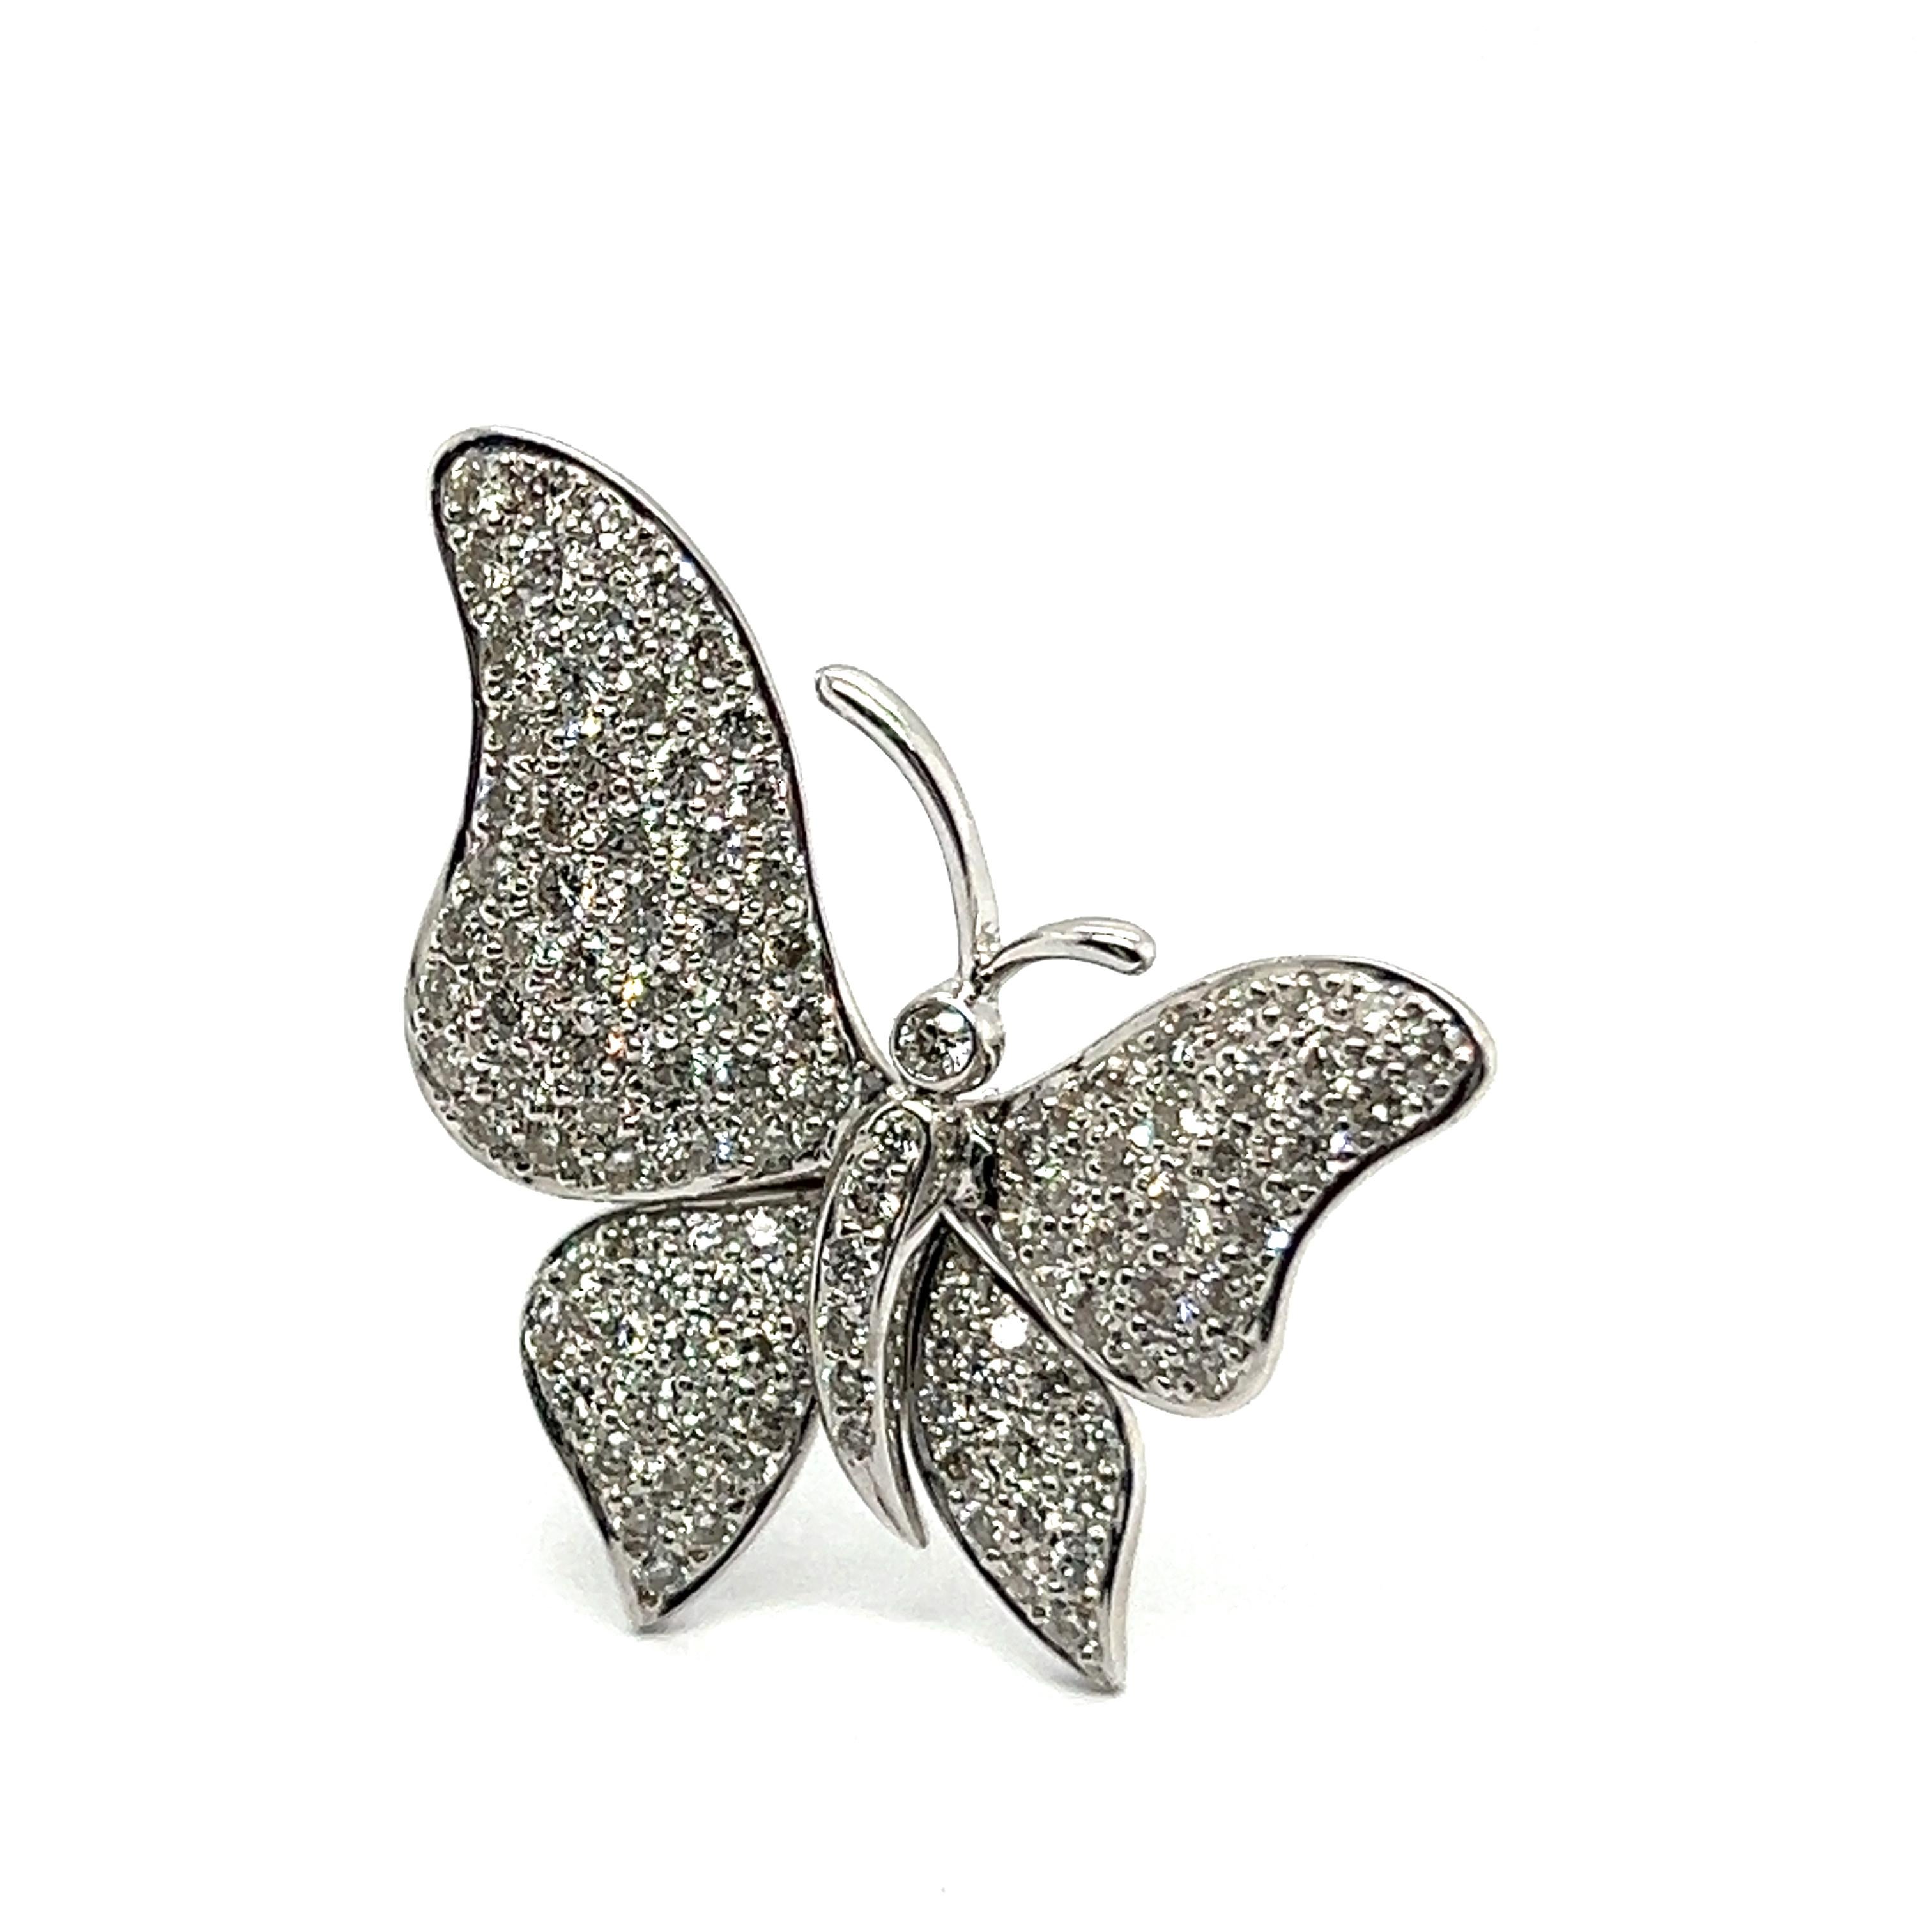 Introducing our charming butterfly-inspired ring, crafted in 18 Karat white gold. Adorned with 116 diamonds totaling 1.67 carats, it sparkles with every flutter. 

Symbolizing grace and lightness, the butterfly motif adds a whimsical touch to any